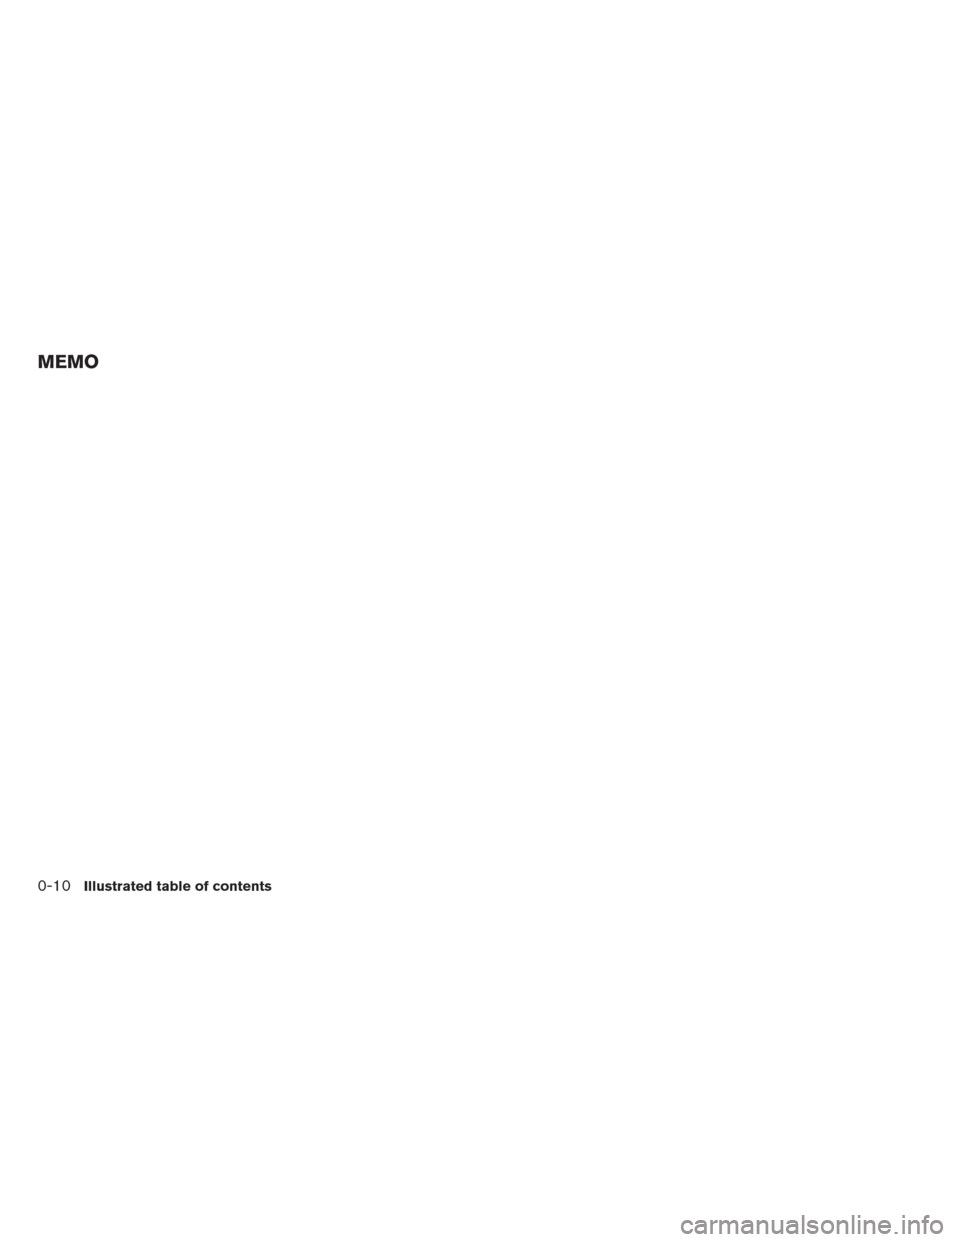 NISSAN MAXIMA 2013 A35 / 7.G User Guide MEMO
0-10Illustrated table of contents 